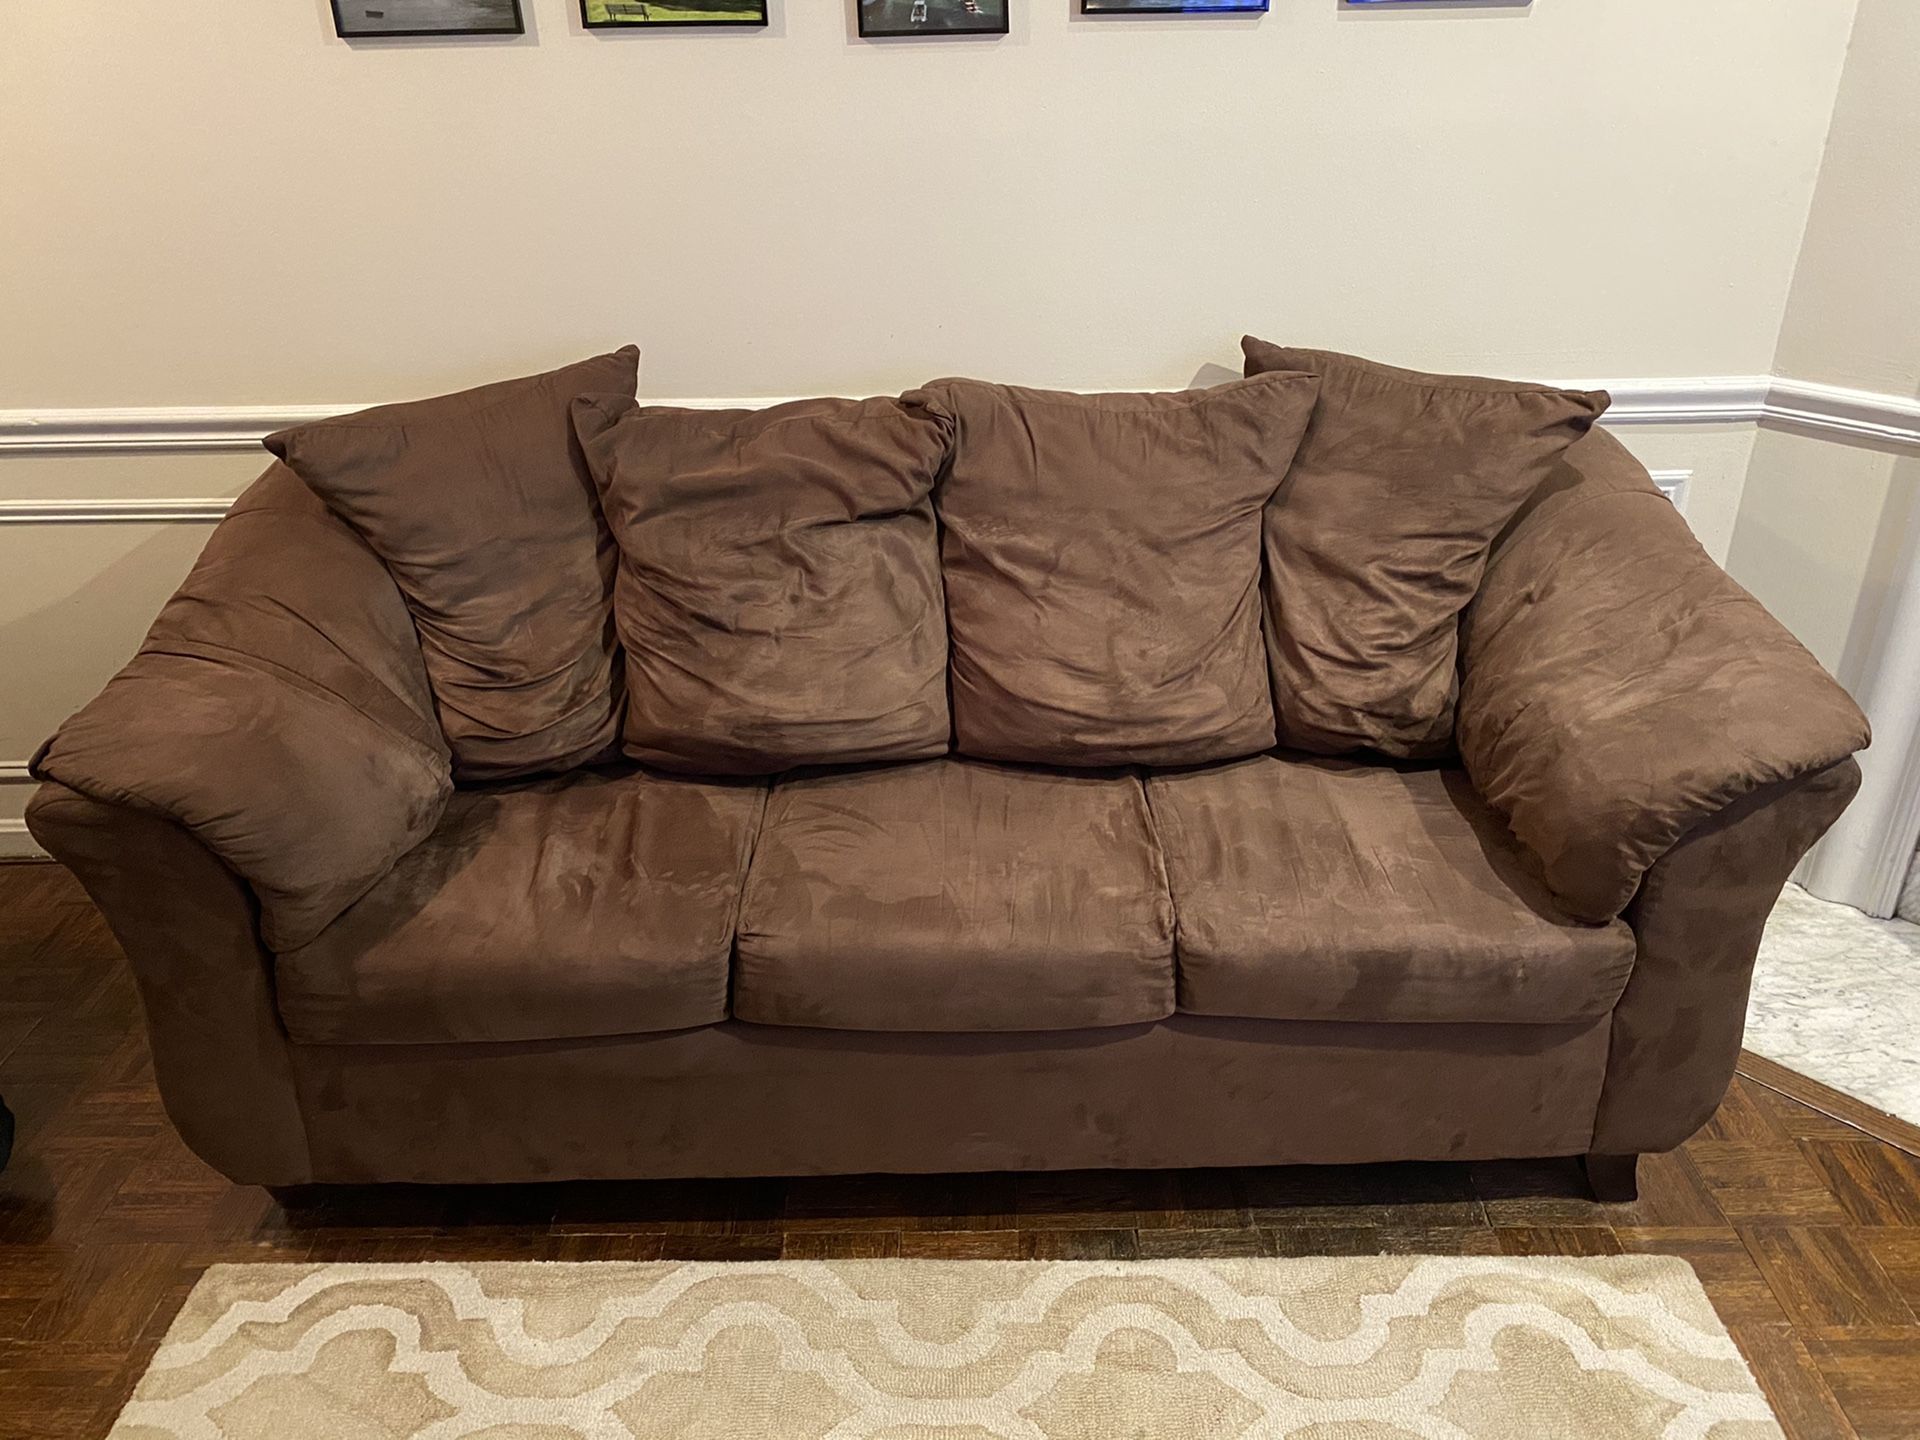 FREE brown couch in good condition